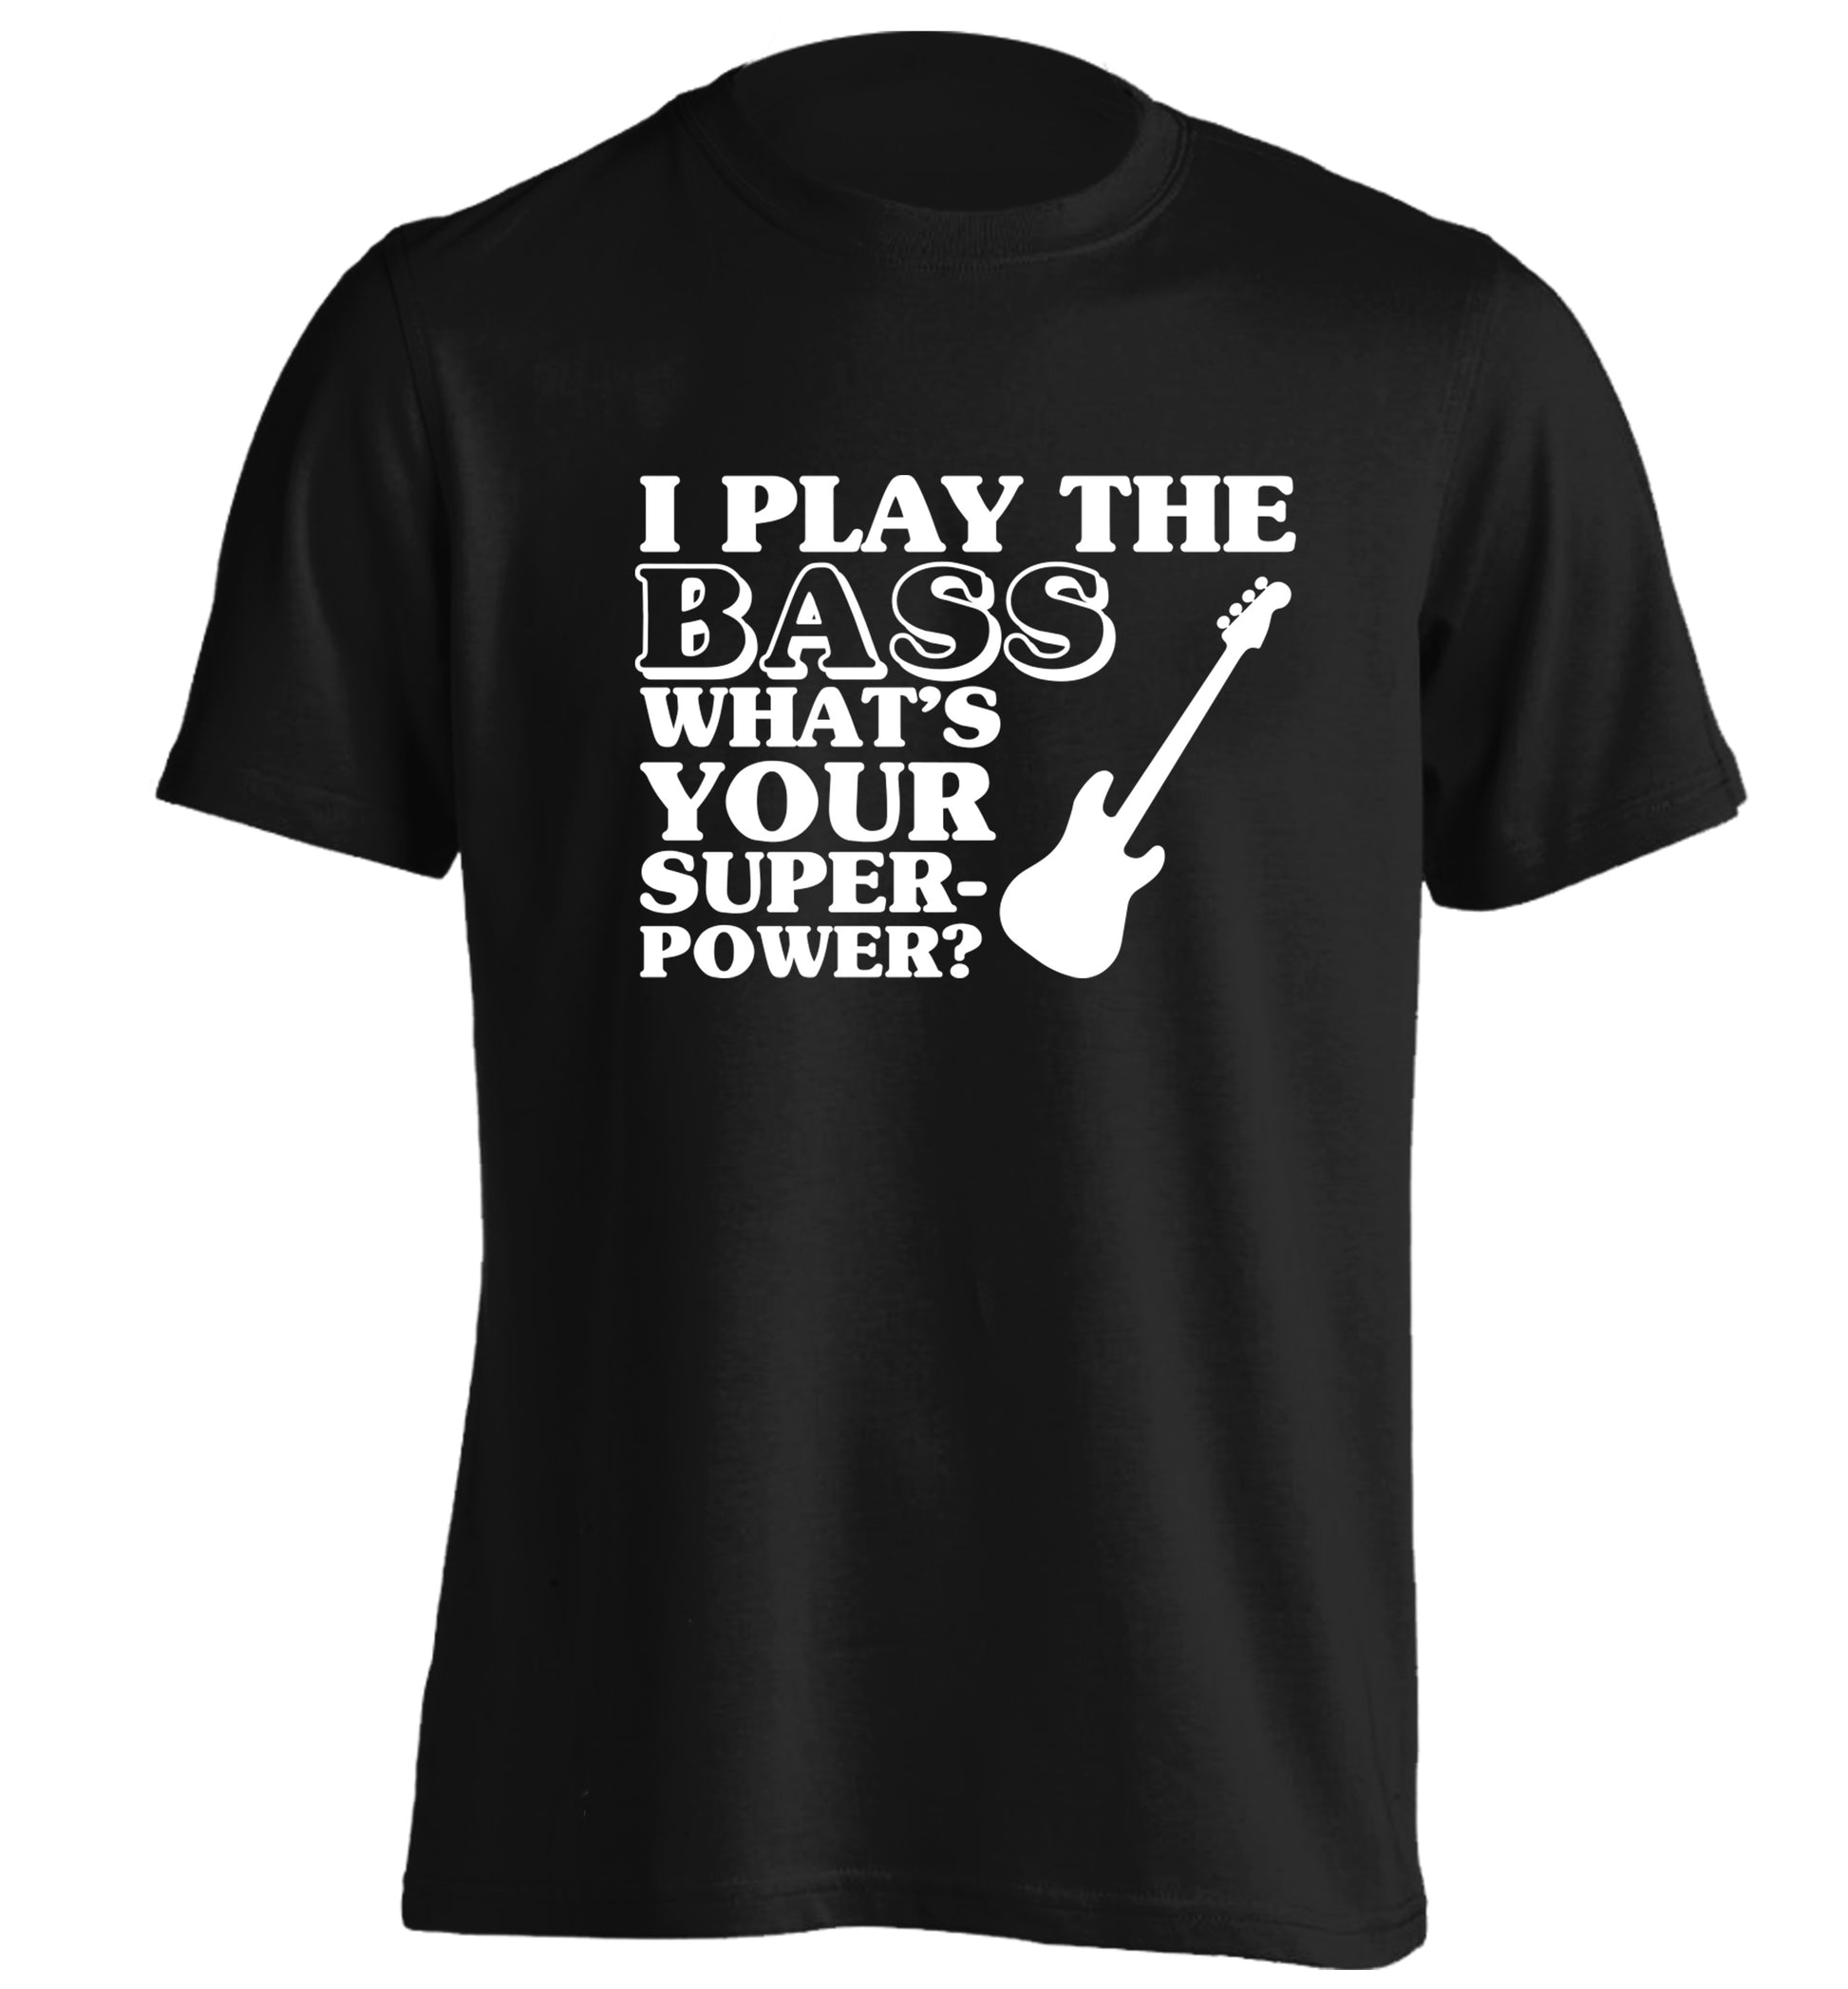 I play the bass what's your superpower? adults unisex black Tshirt 2XL